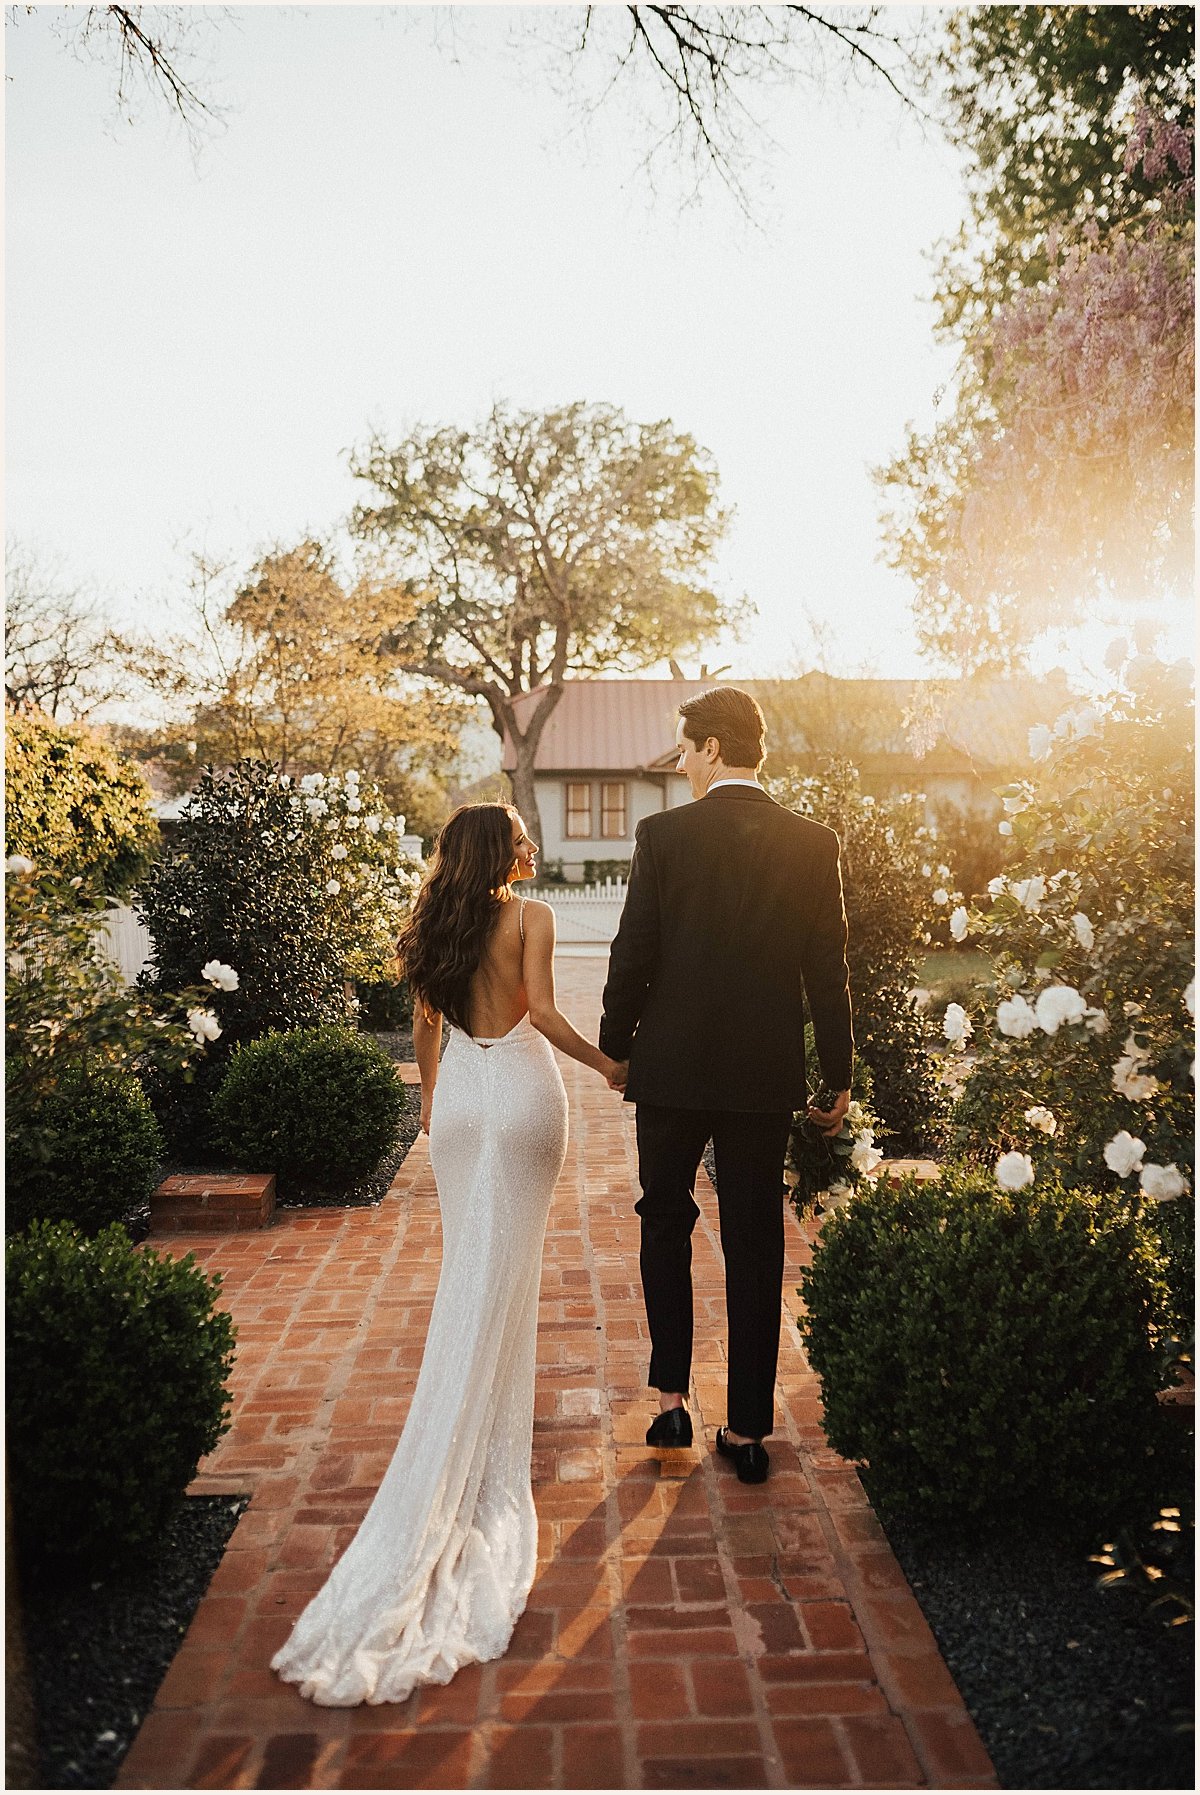 Sexy and romantic bride and groom portraits on wedding day | Luxury Wedding Photographer | Lauren Parr Photography